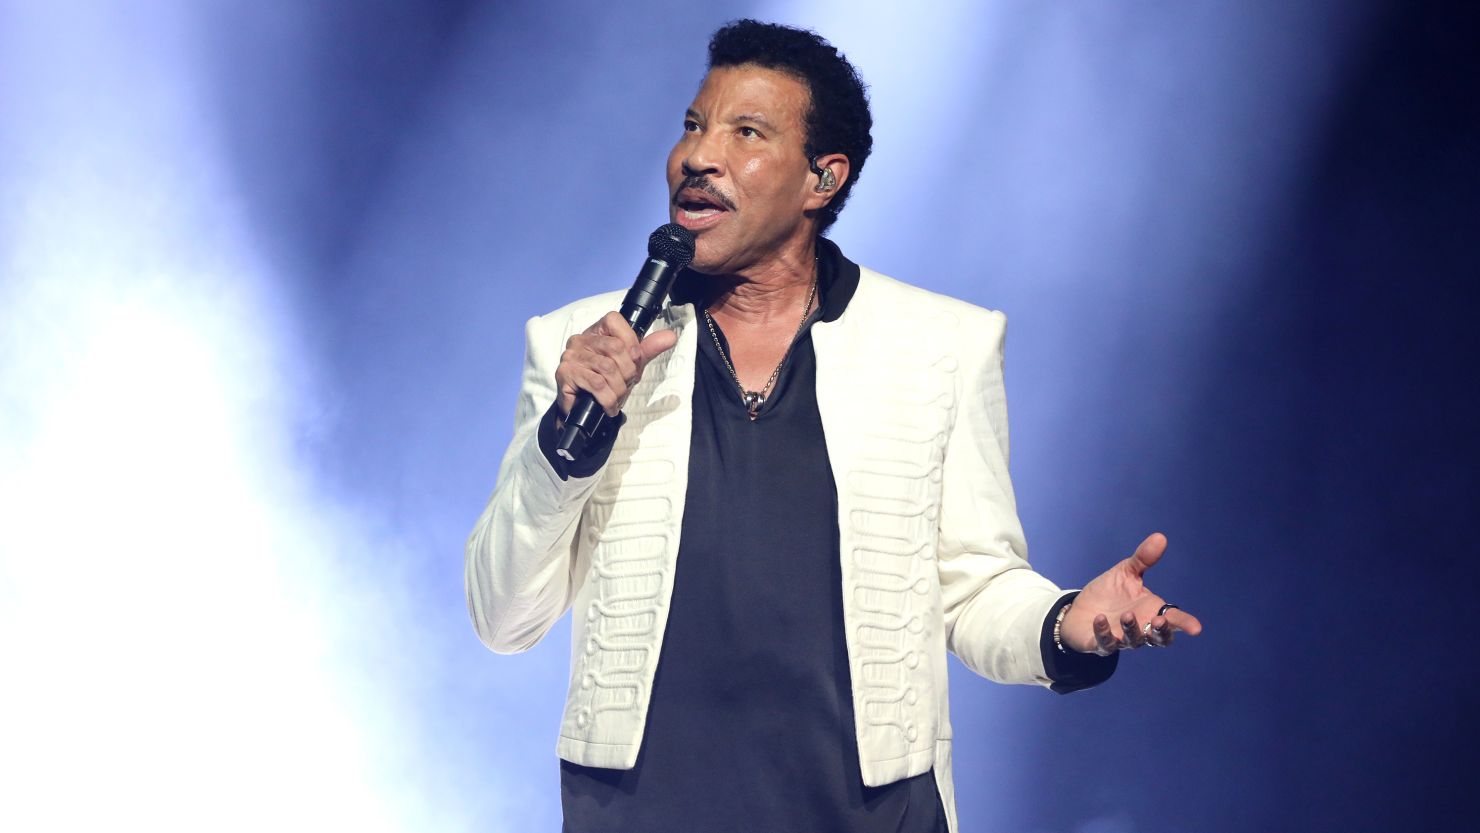 Lionel Richie Apology: Concert Cancellation and Rescheduling